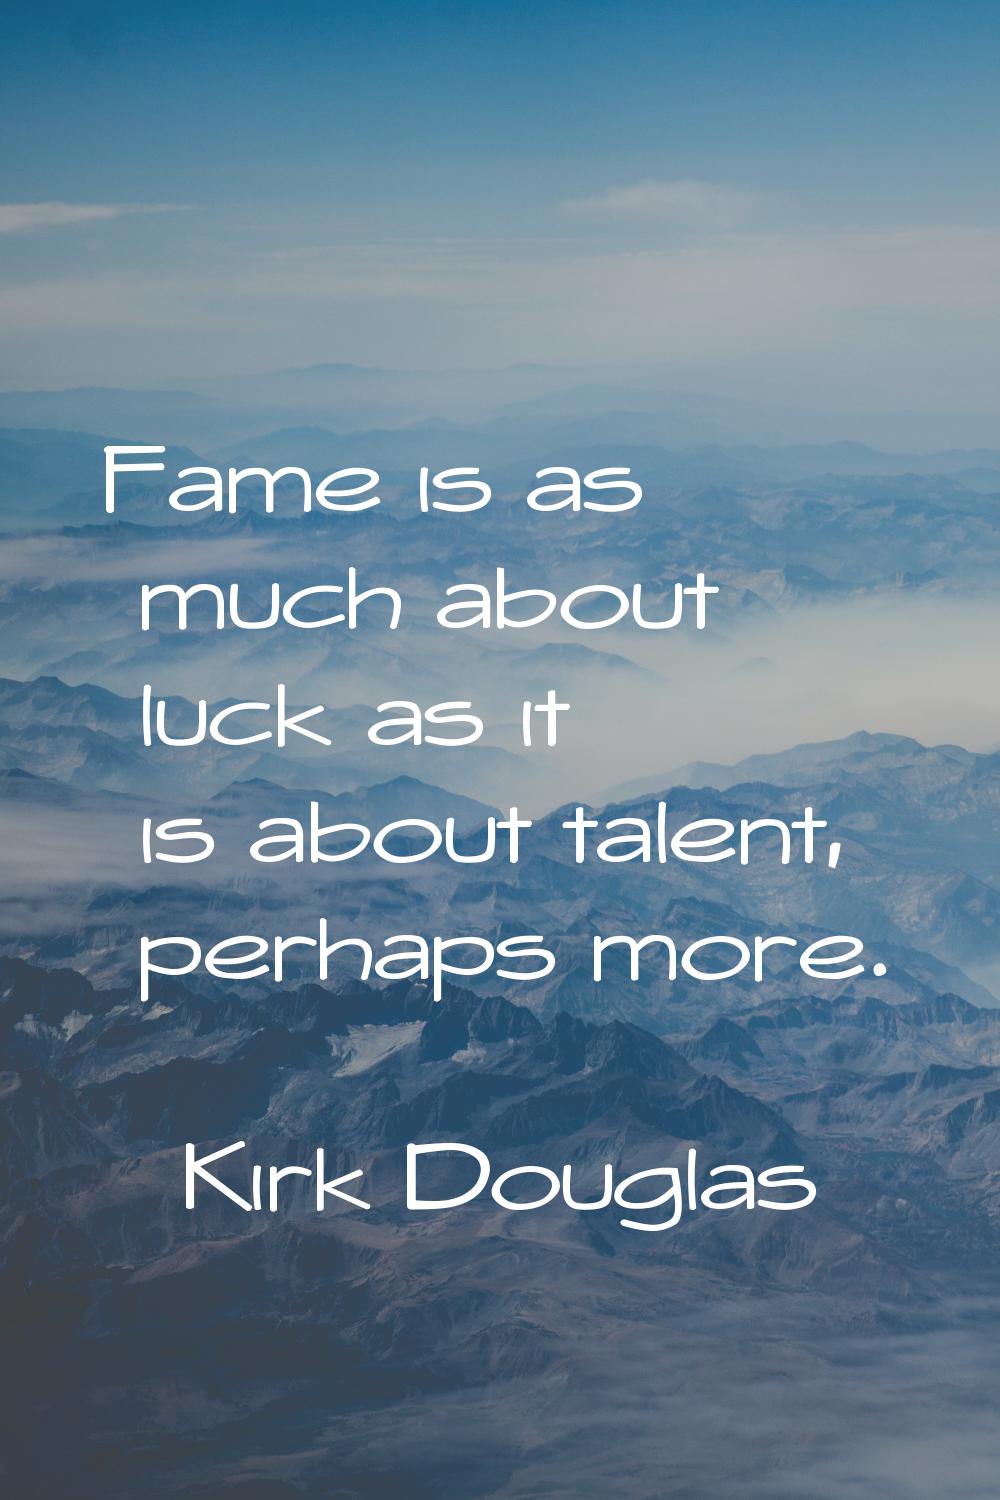 Fame is as much about luck as it is about talent, perhaps more.